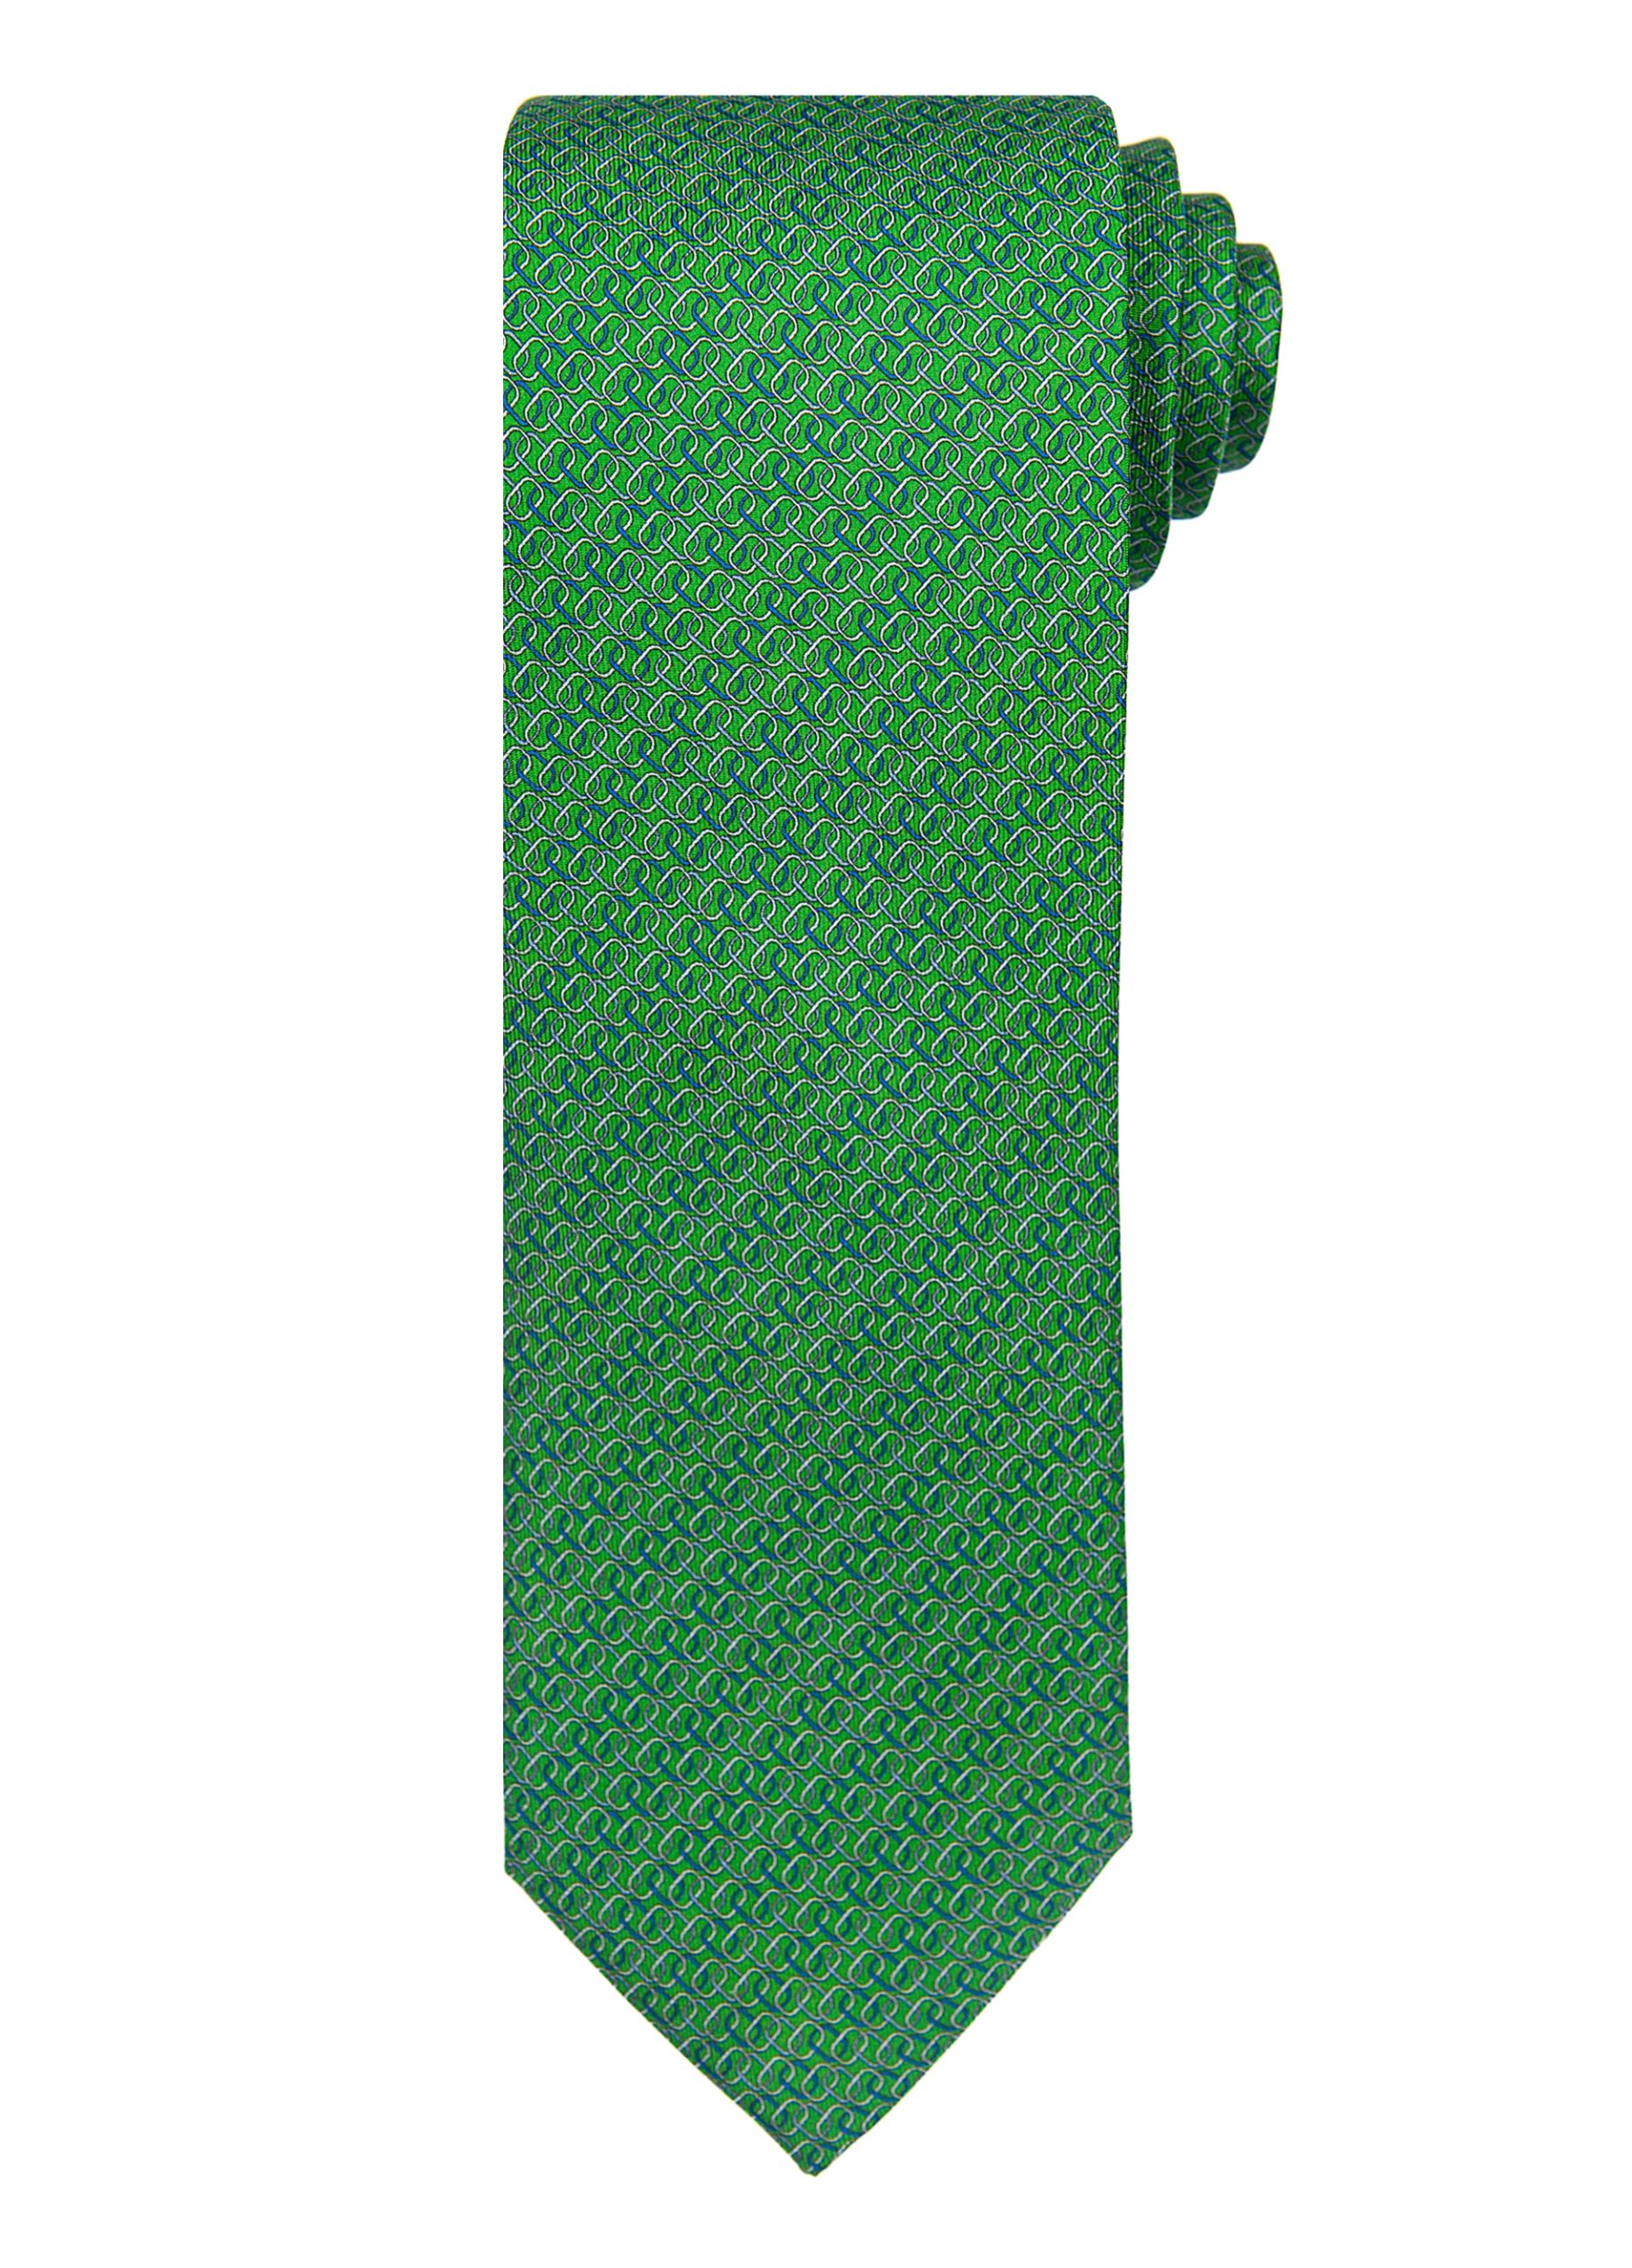 Roderick Charles green and blue tie